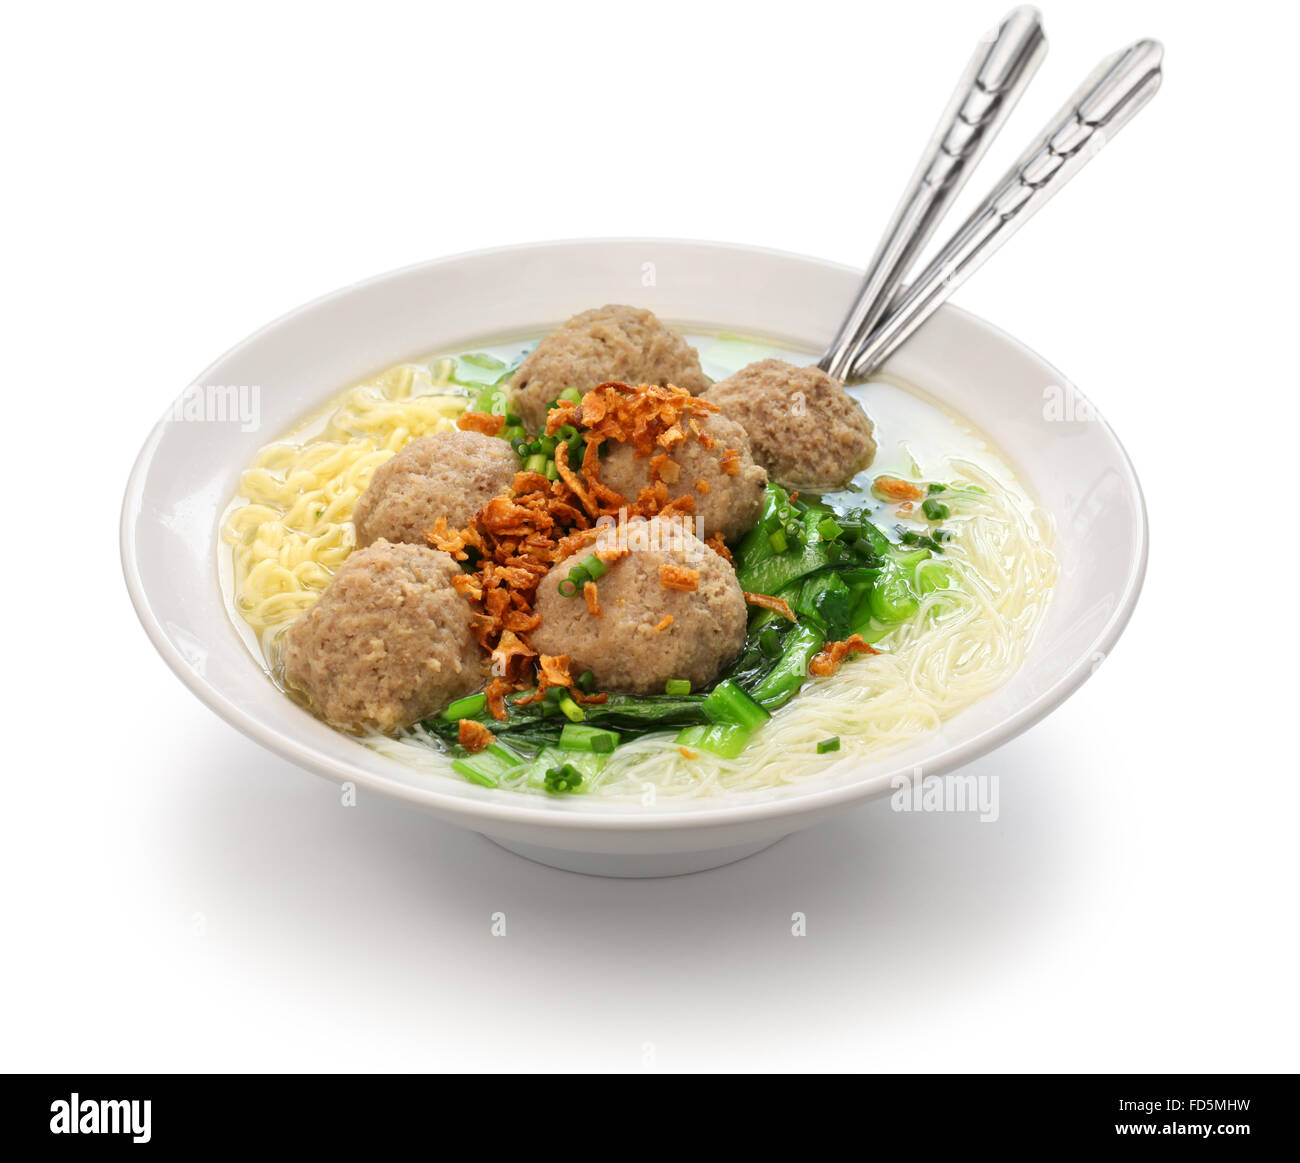 bakso, meatball soup with noodles, indonesian cuisine Stock Photo